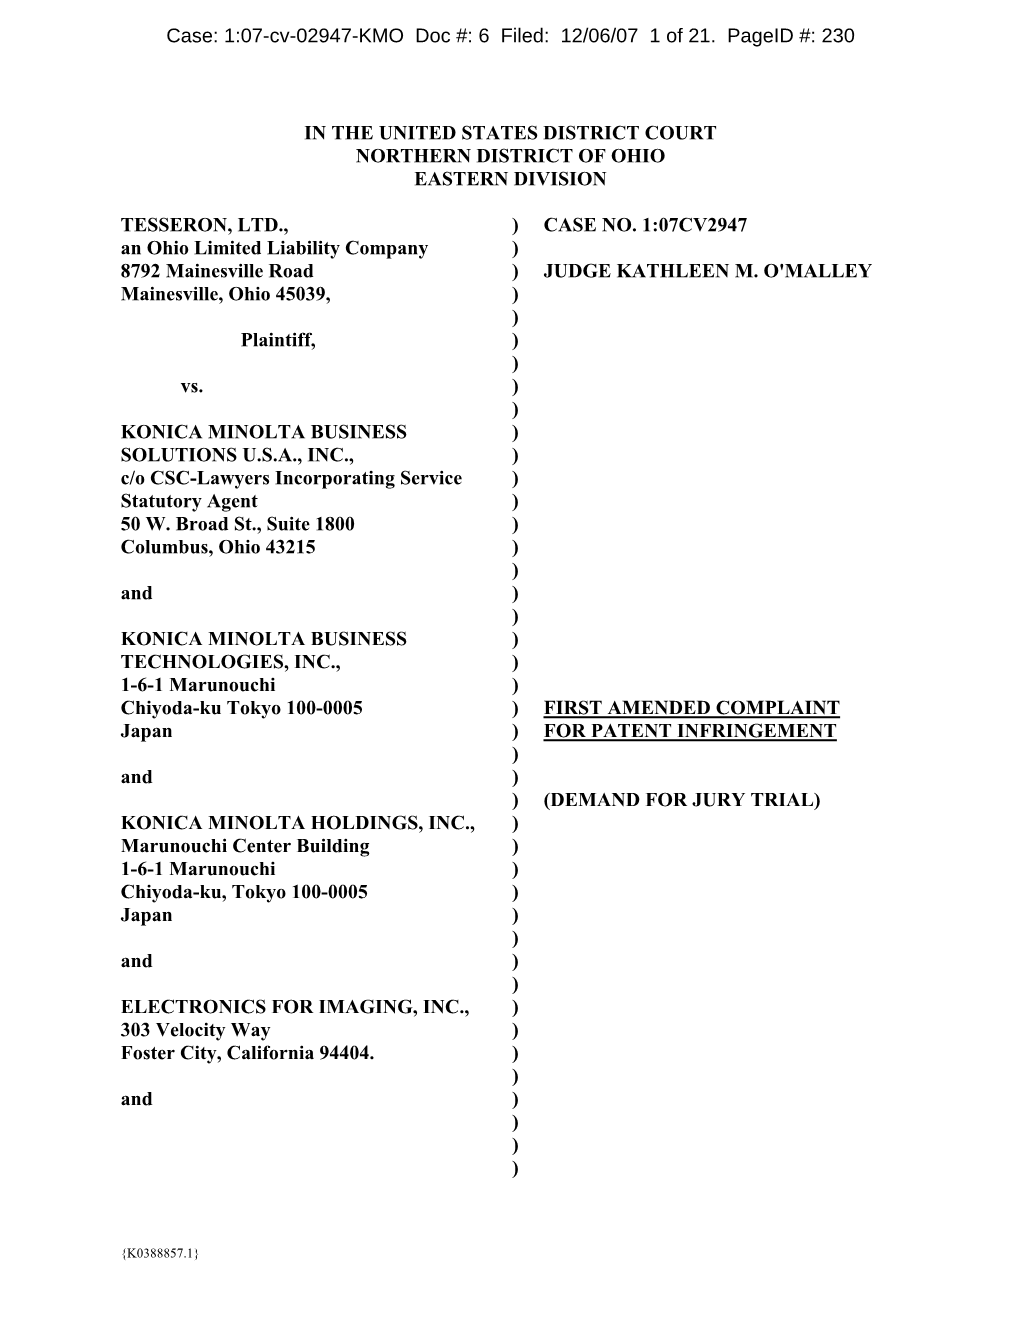 Amended Complaint Adding EFI and Ricoh (K0388470.DOC;1)